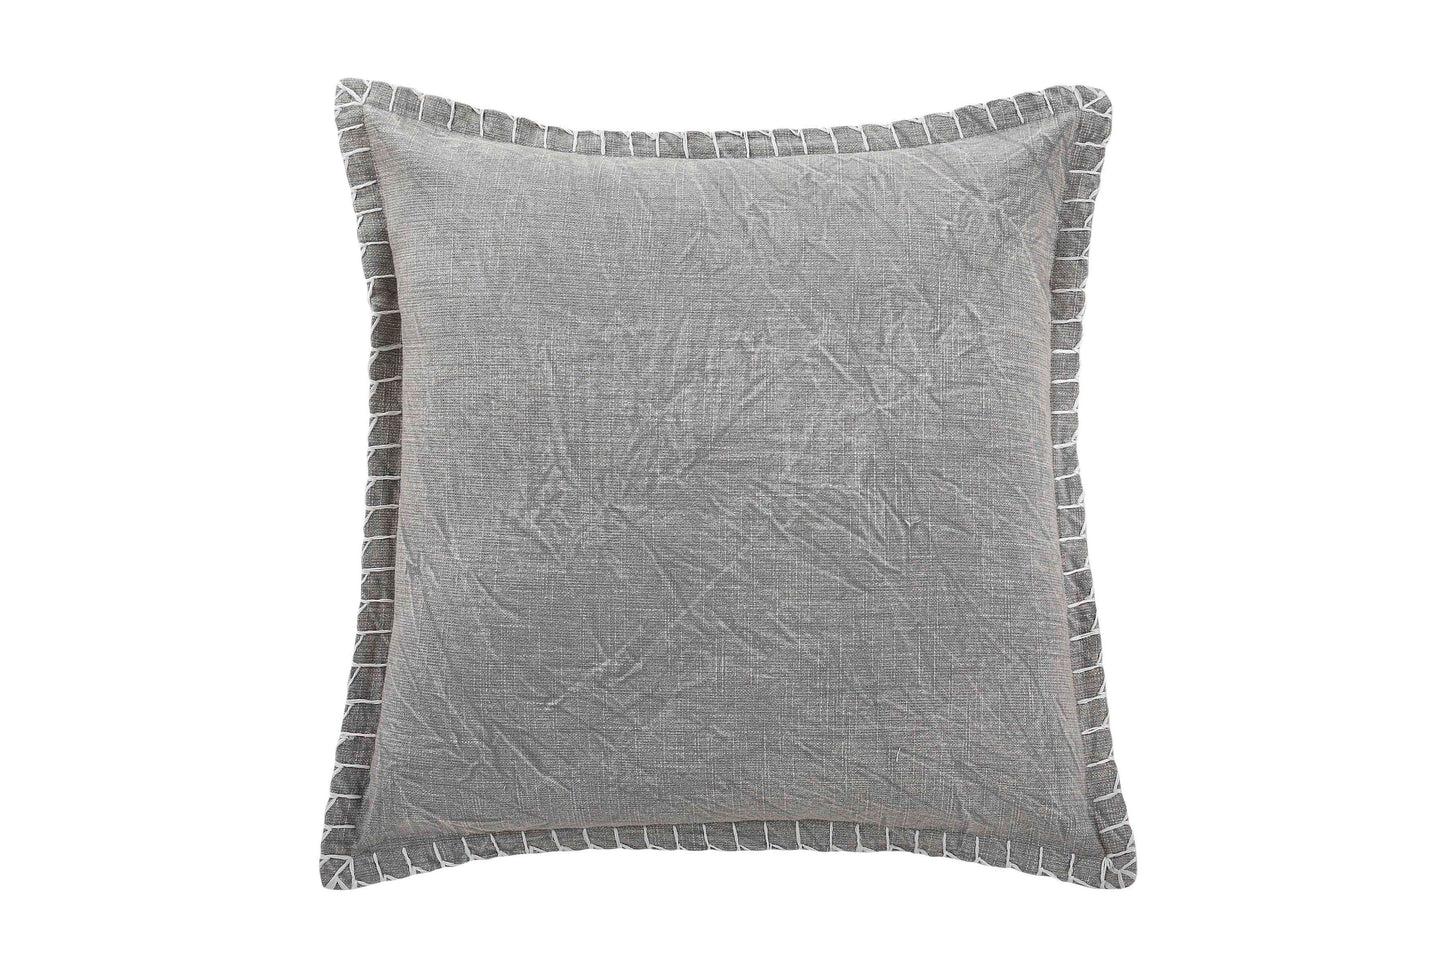 Stone Washed Throw Pillow, Grey - 21x21 Inch by The Artisen - Sumiye Co